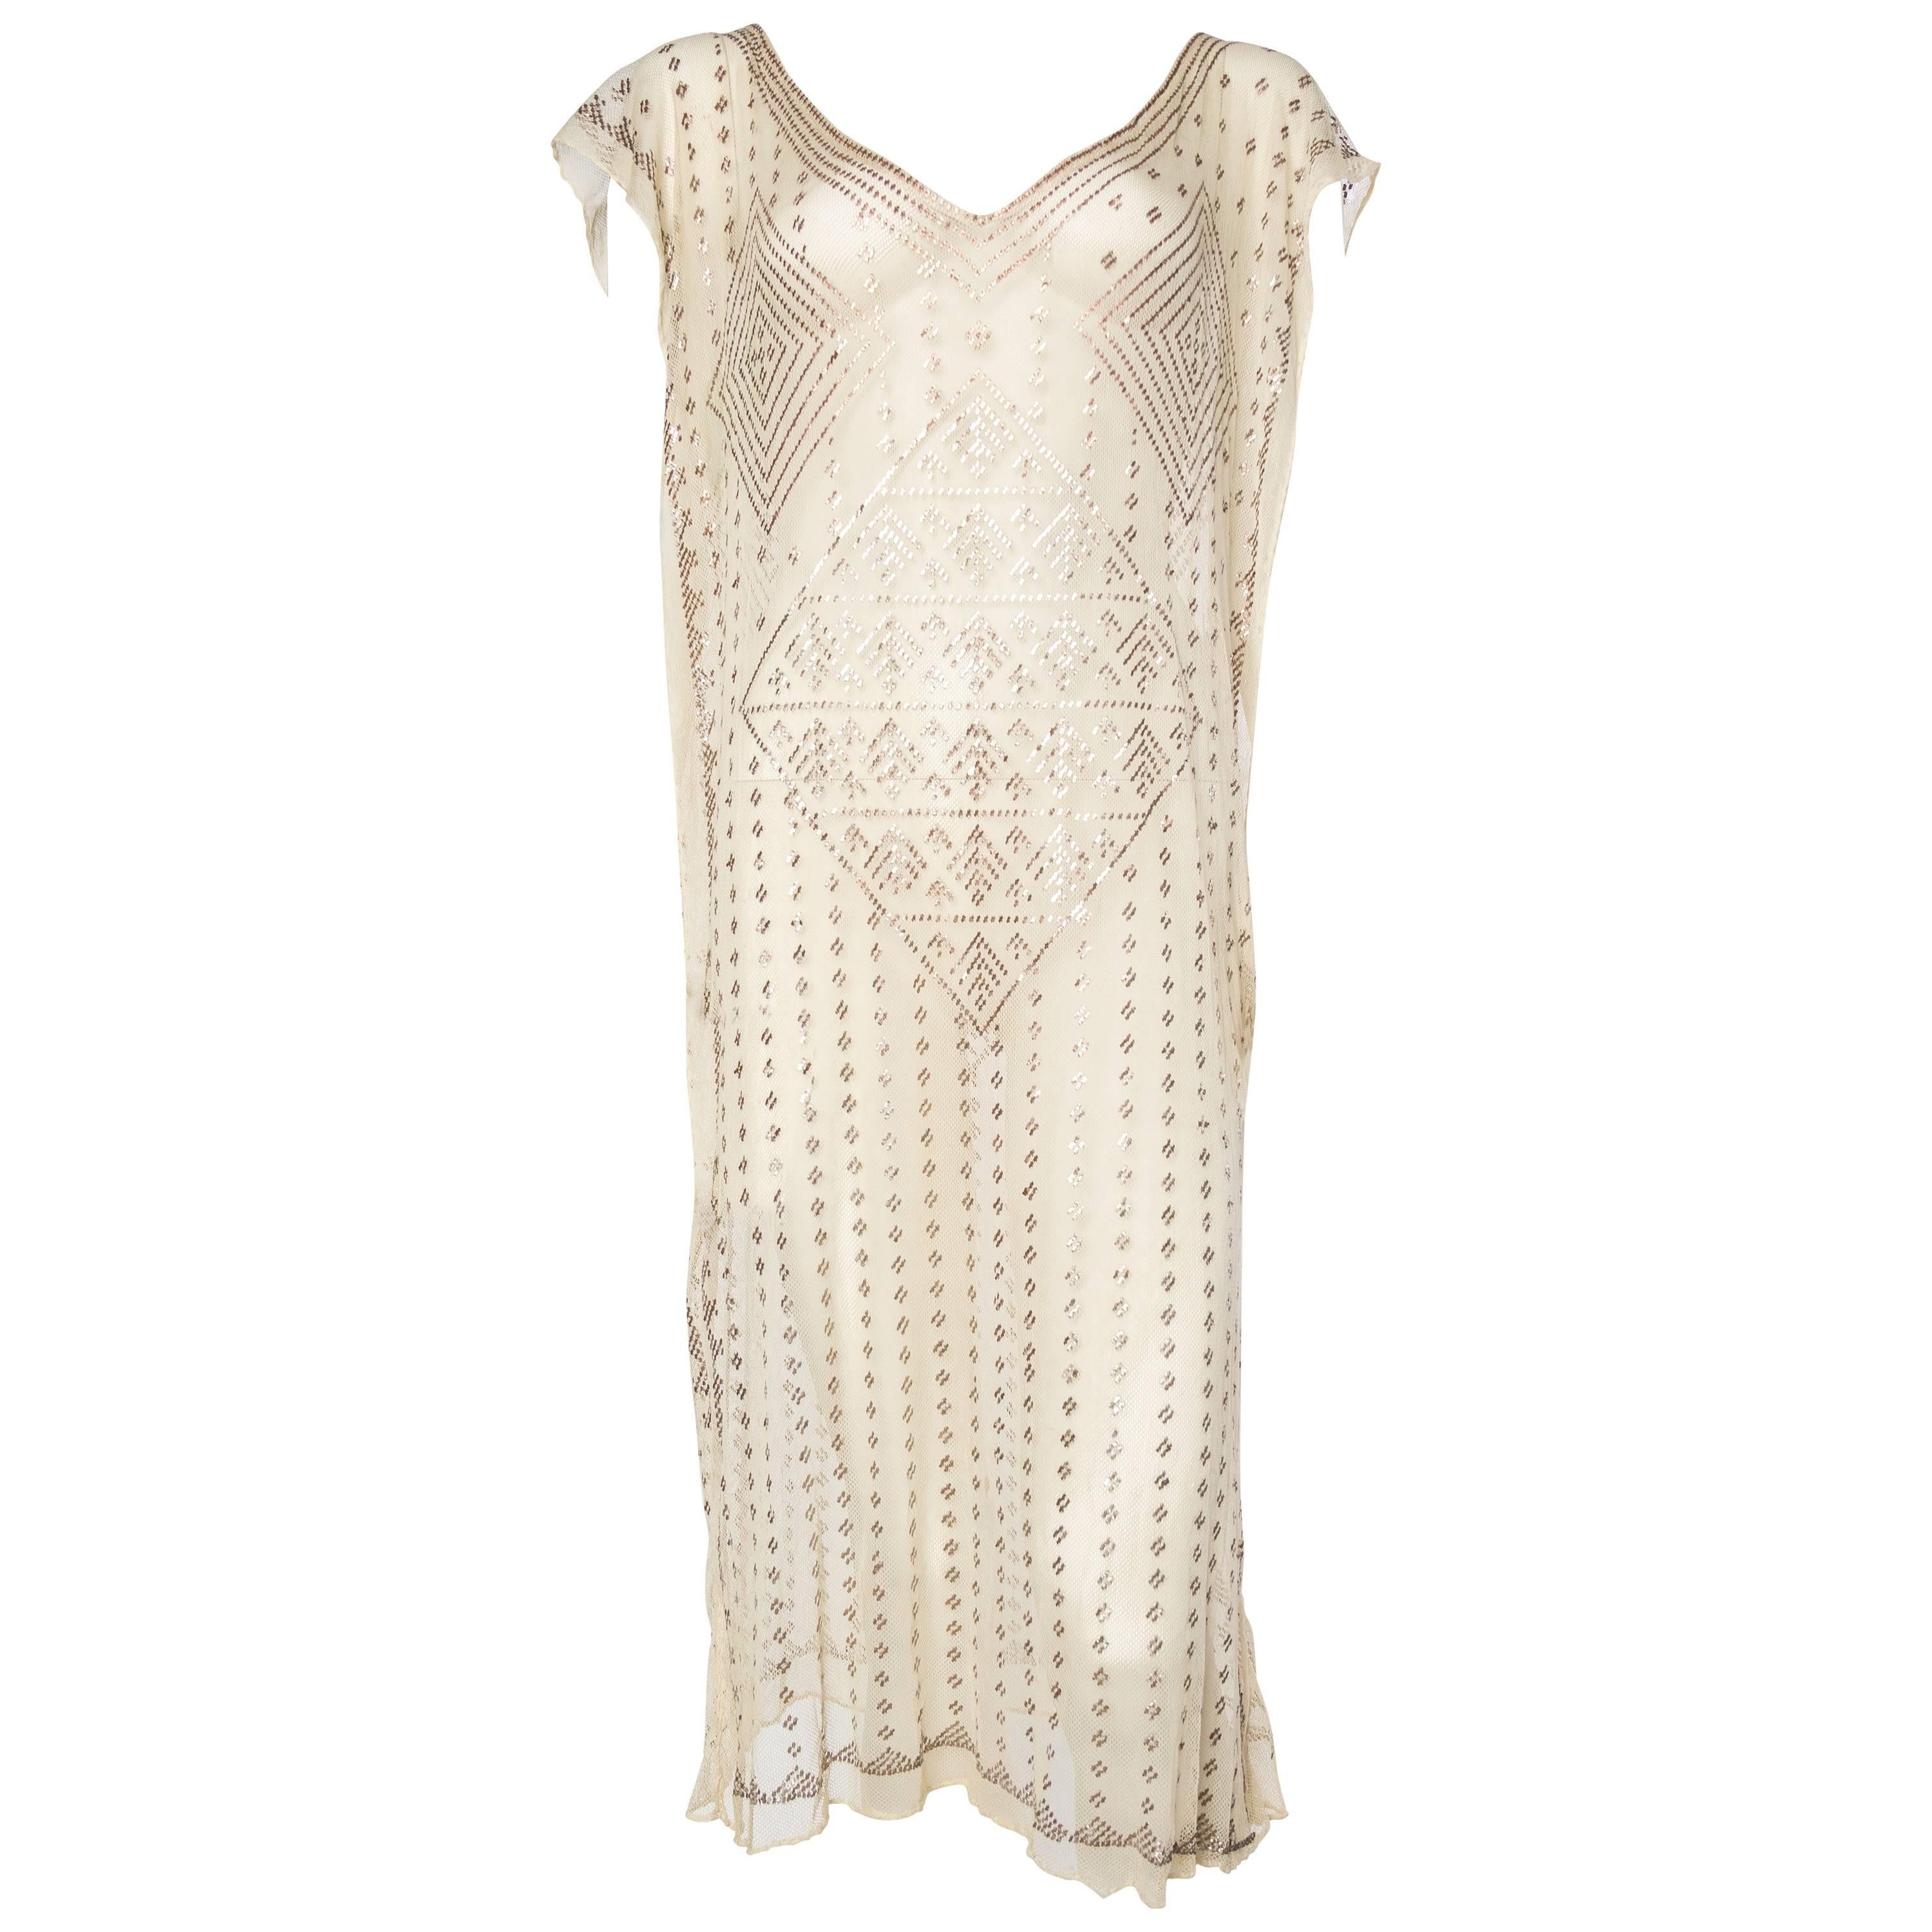 1920s Egyptian Assuit Net and Silver Dress